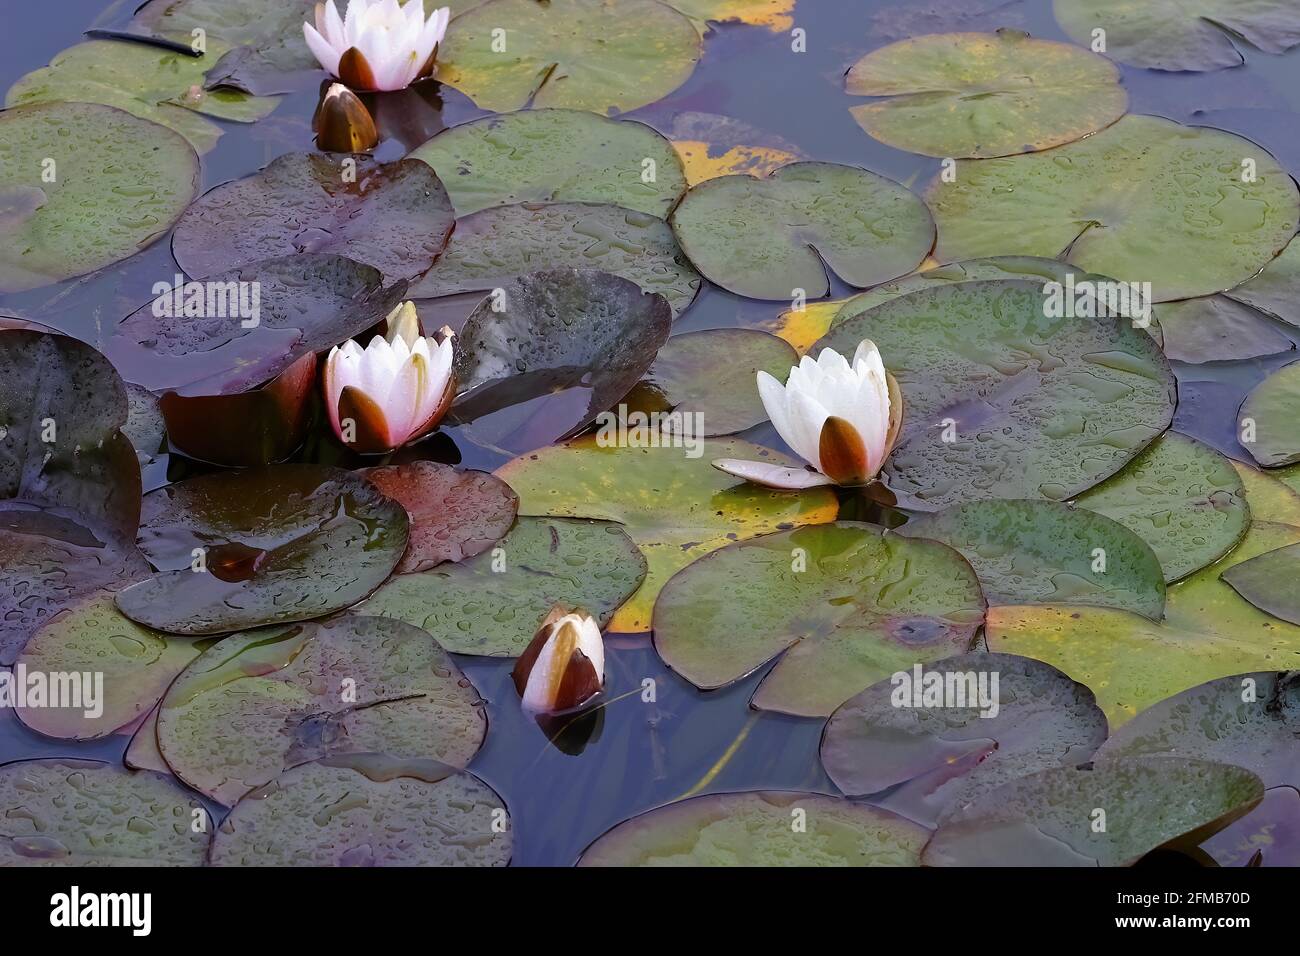 Several water lilies of the species 'Marliacea Carnea' in a water lily pond between large water lily leaves on the pond surface, Nymphaea Hybride Stock Photo